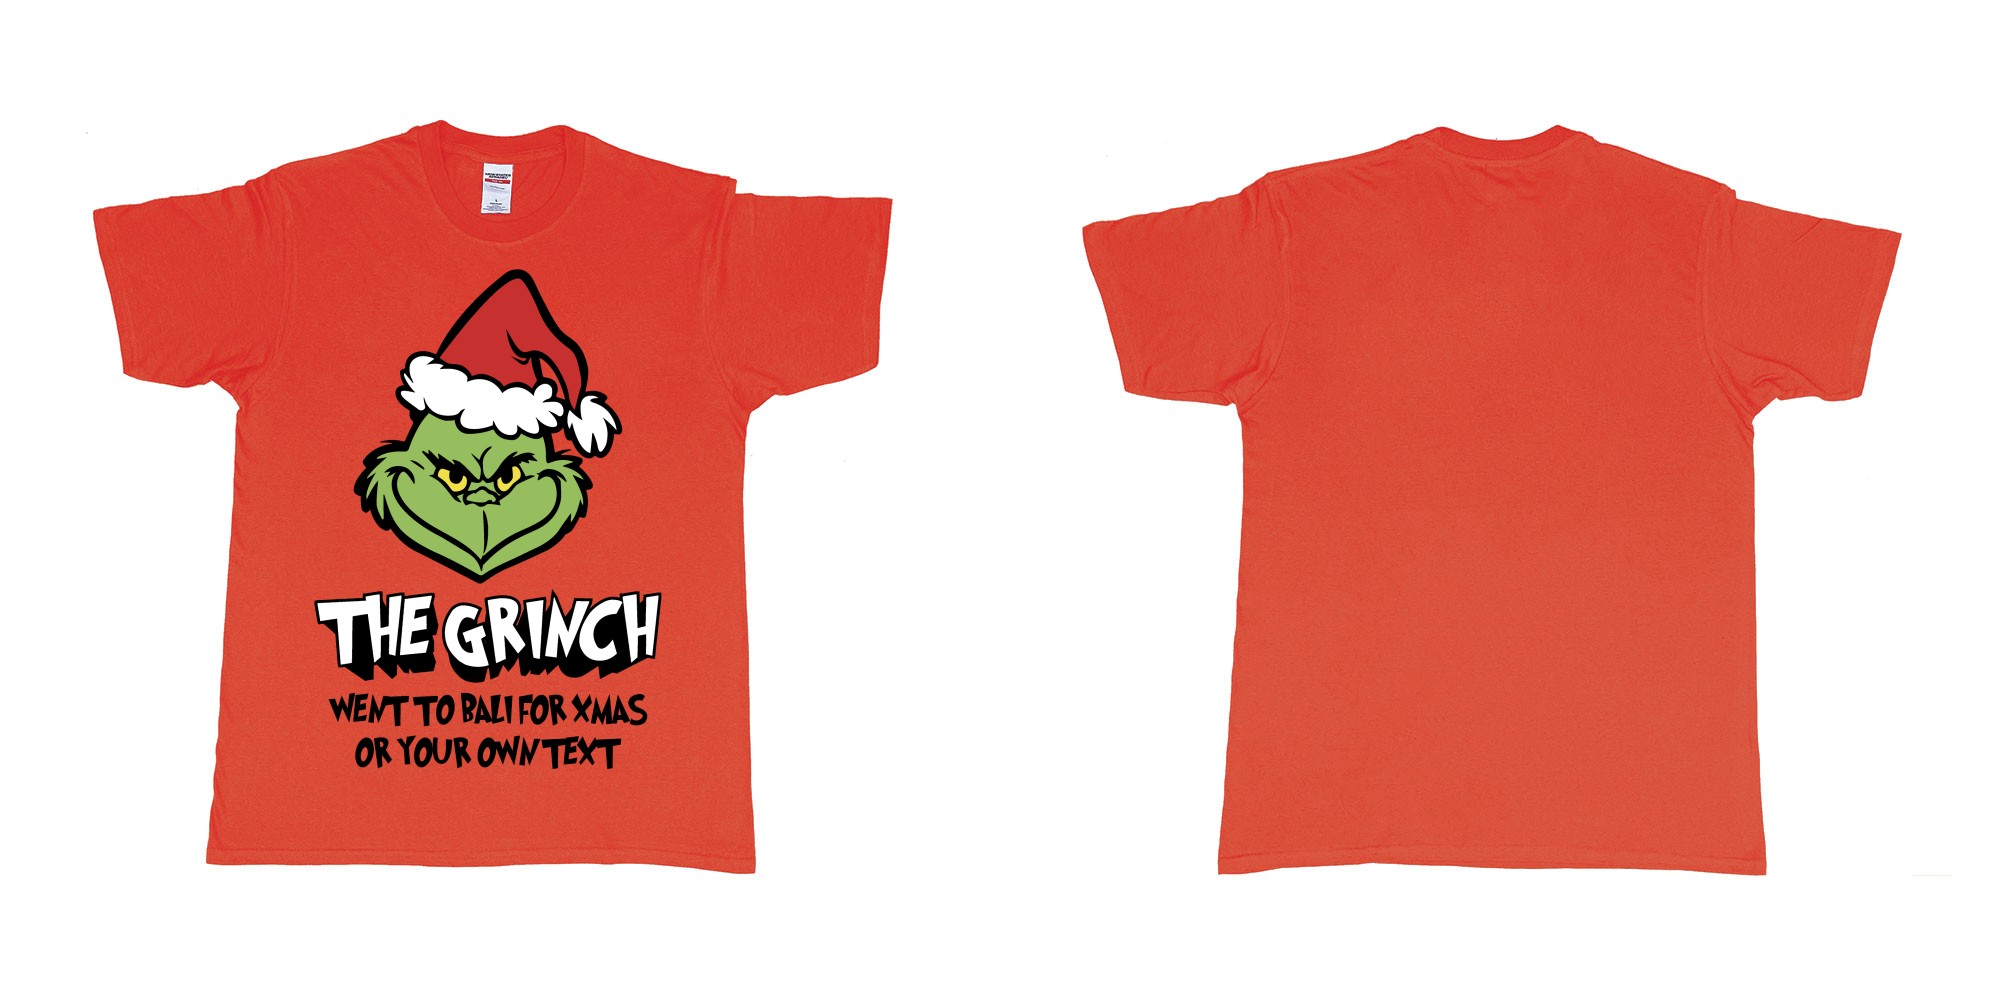 Custom tshirt design  in fabric color red choice your own text made in Bali by The Pirate Way